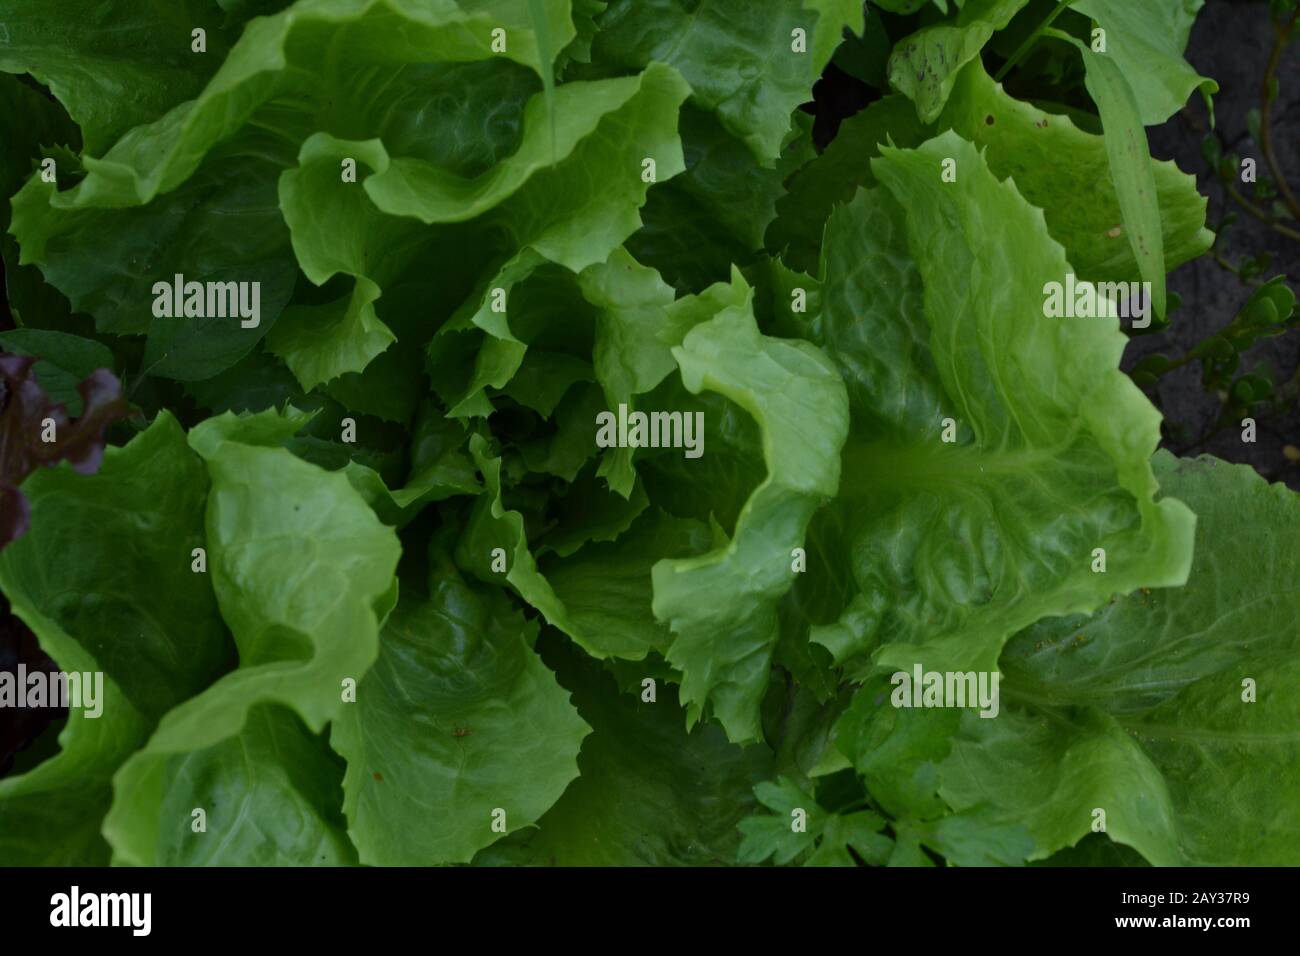 Salad Lettuce Lactuca It Grows In The Garden The Leaves Are